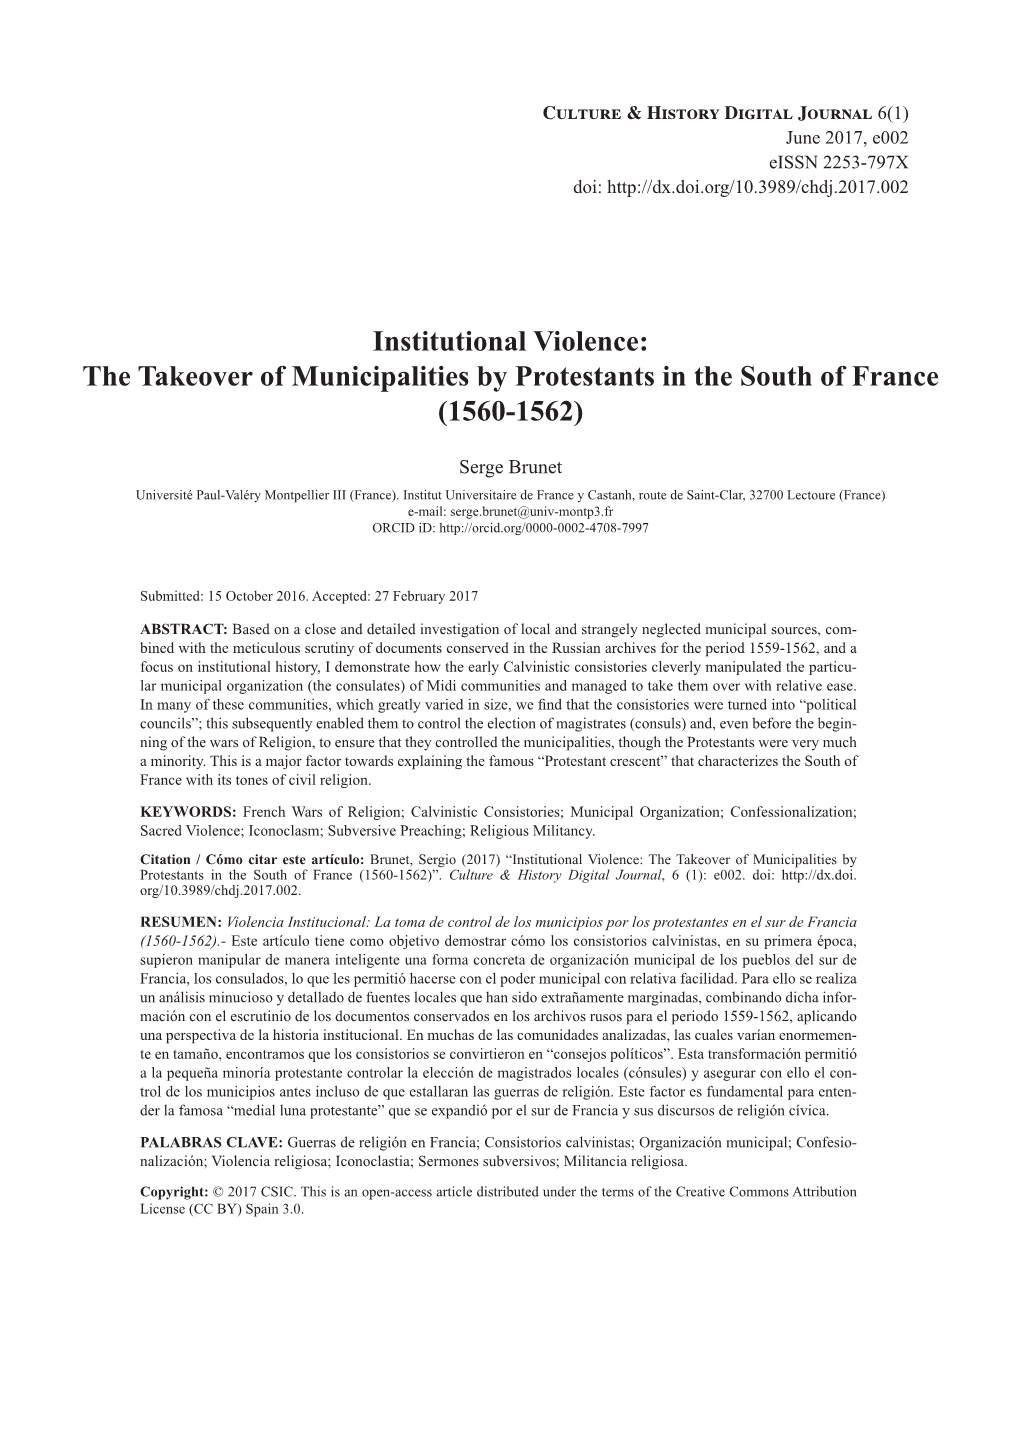 Institutional Violence: the Takeover of Municipalities by Protestants in the South of France (1560-1562)